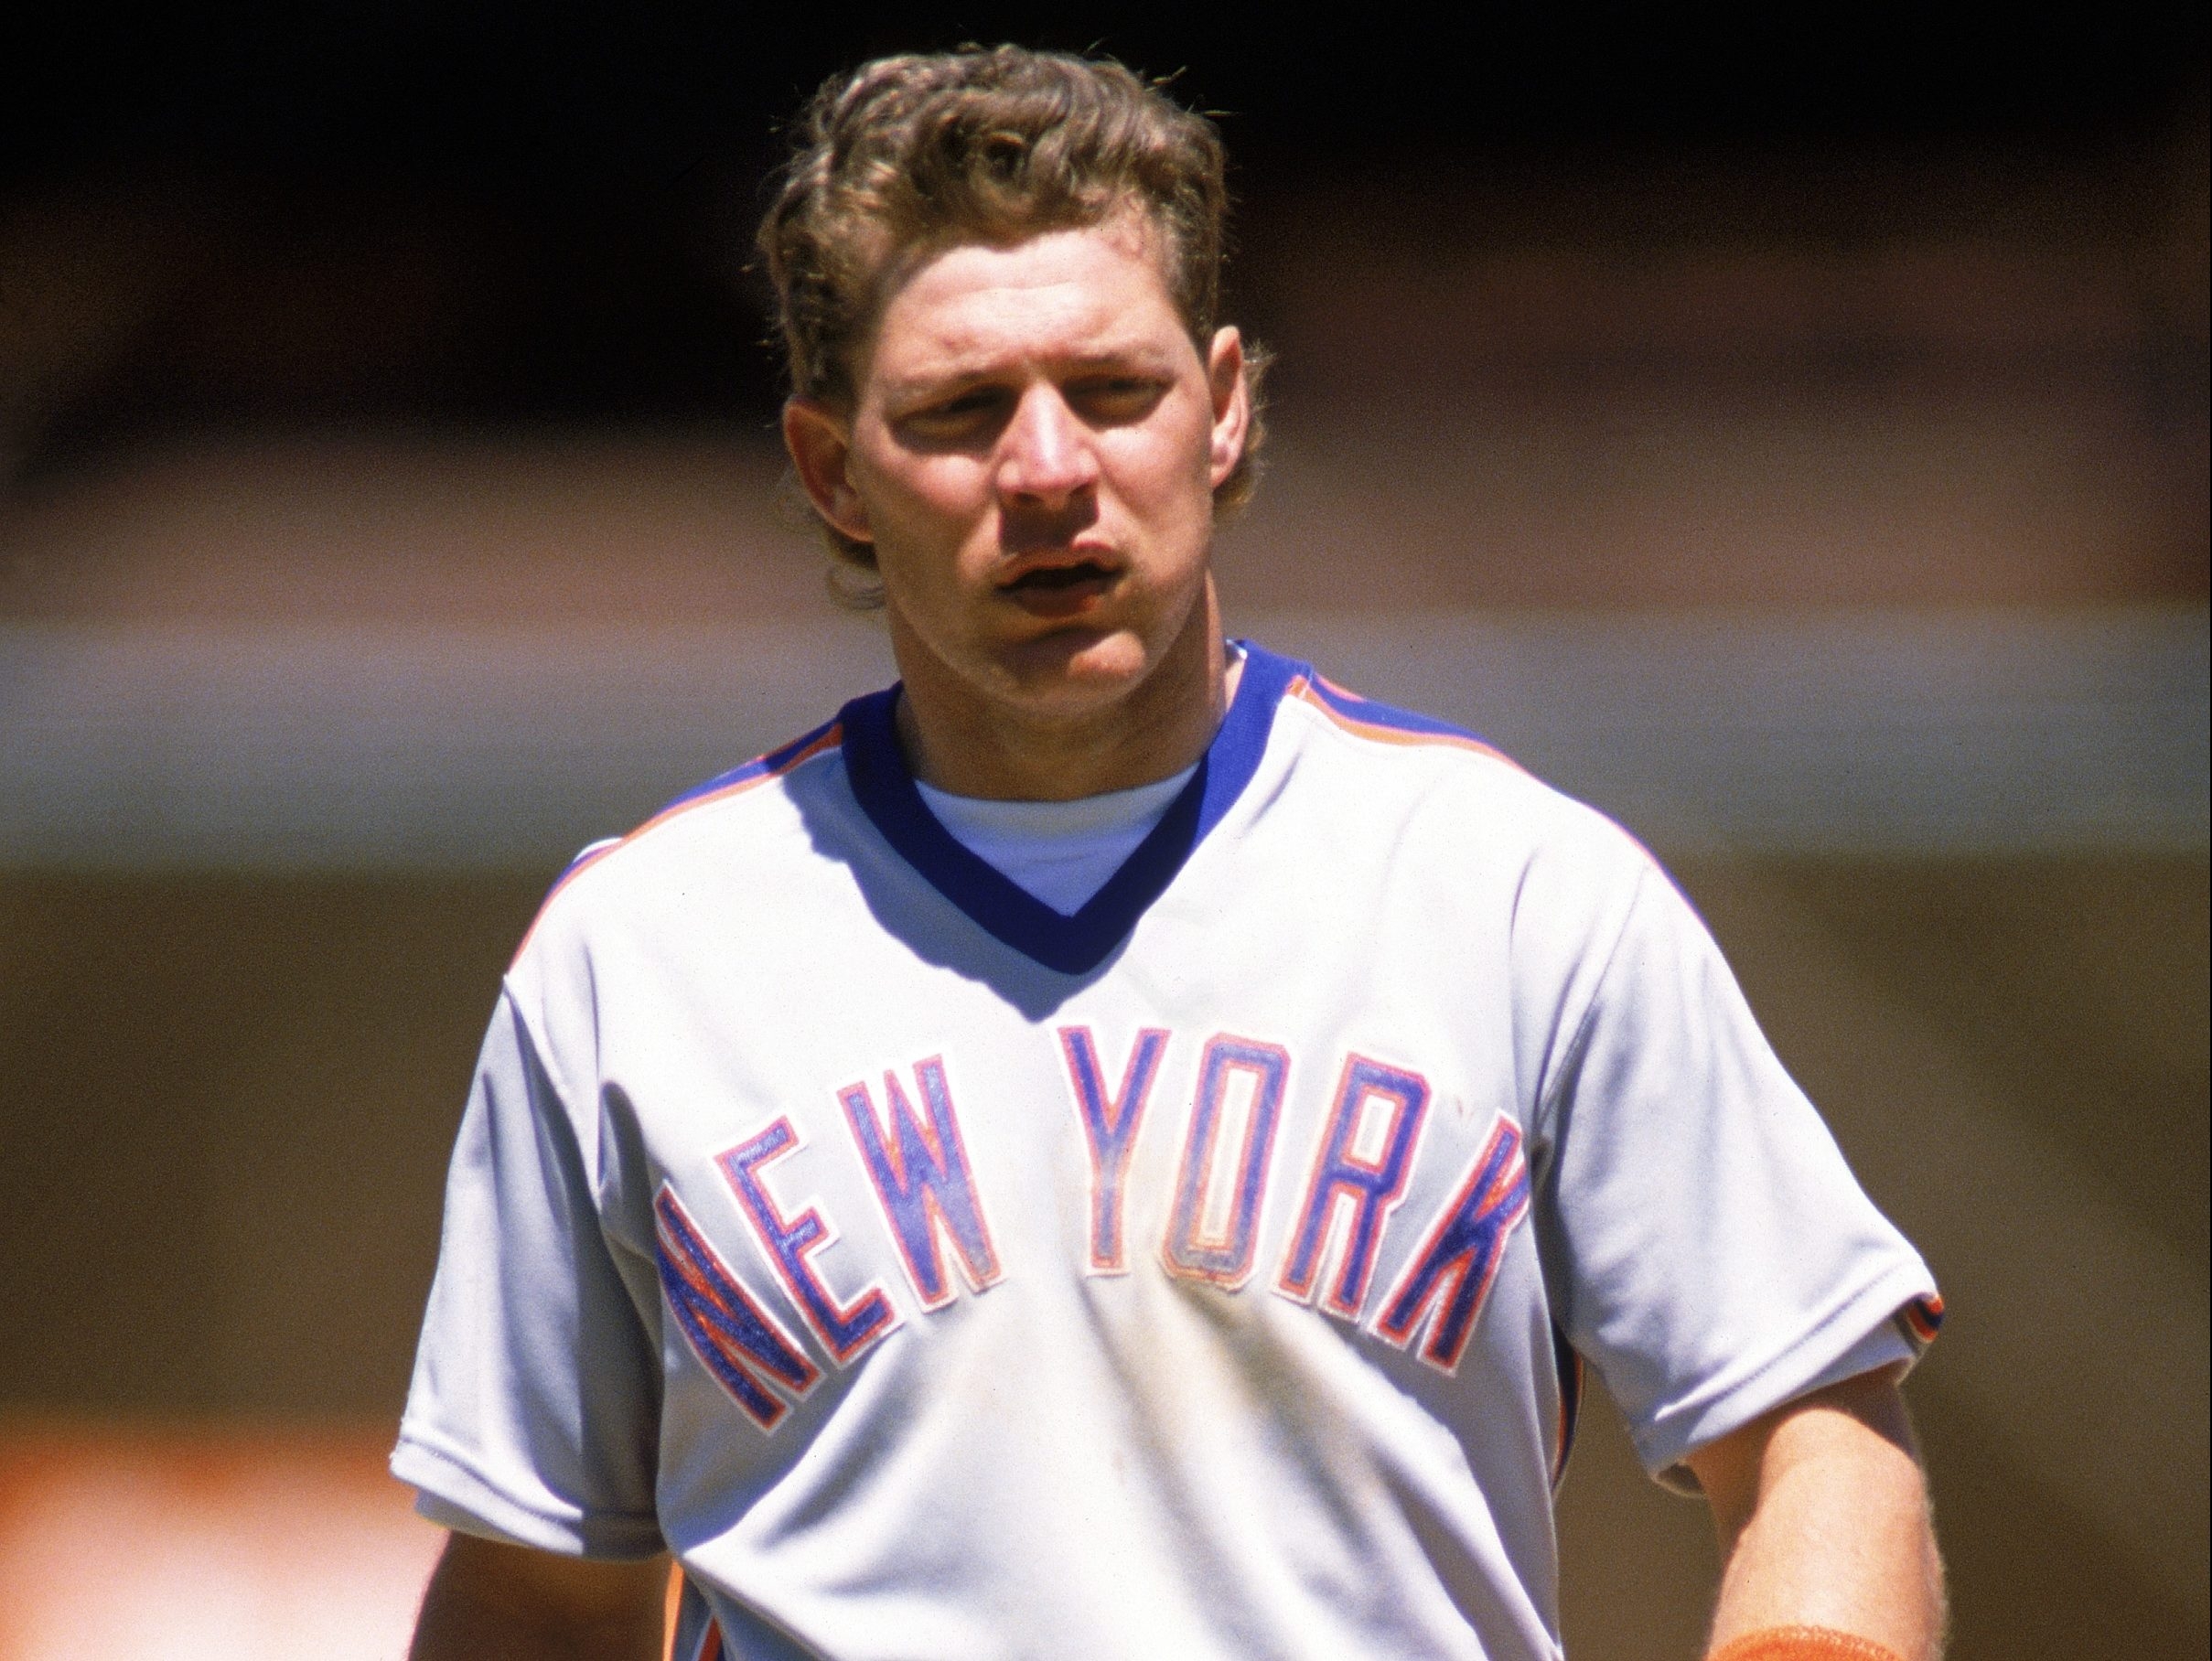 Former New York Mets player Lenny Dykstra claims he was kidnapped